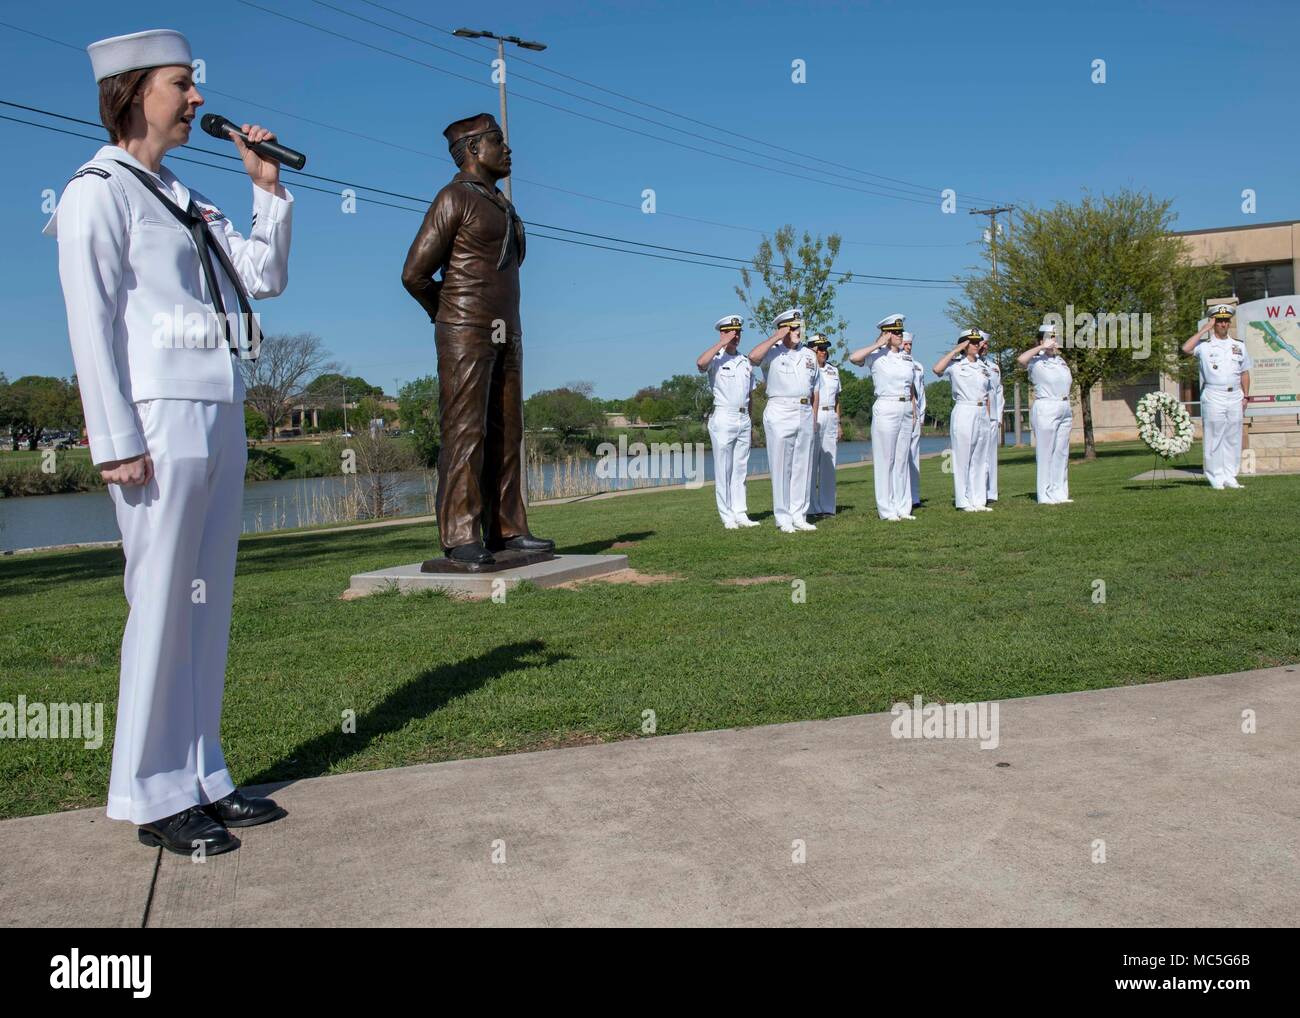 180404-N-YR245-0023 WACO, Texas (April 4, 2018) Sailors honor Doris “Dorie” Miller at a ceremony on the Waco Riverwalk during Waco Navy Week. The Navy Office of Community Outreach uses the Navy Week program to bring Navy Sailors, equipment and displays to approximately 15 American cities each year for a week-long schedule of outreach engagements. (U.S Navy photo by Mass Communication Specialist 2nd Class Craig Z. Rodarte/Released) Stock Photo